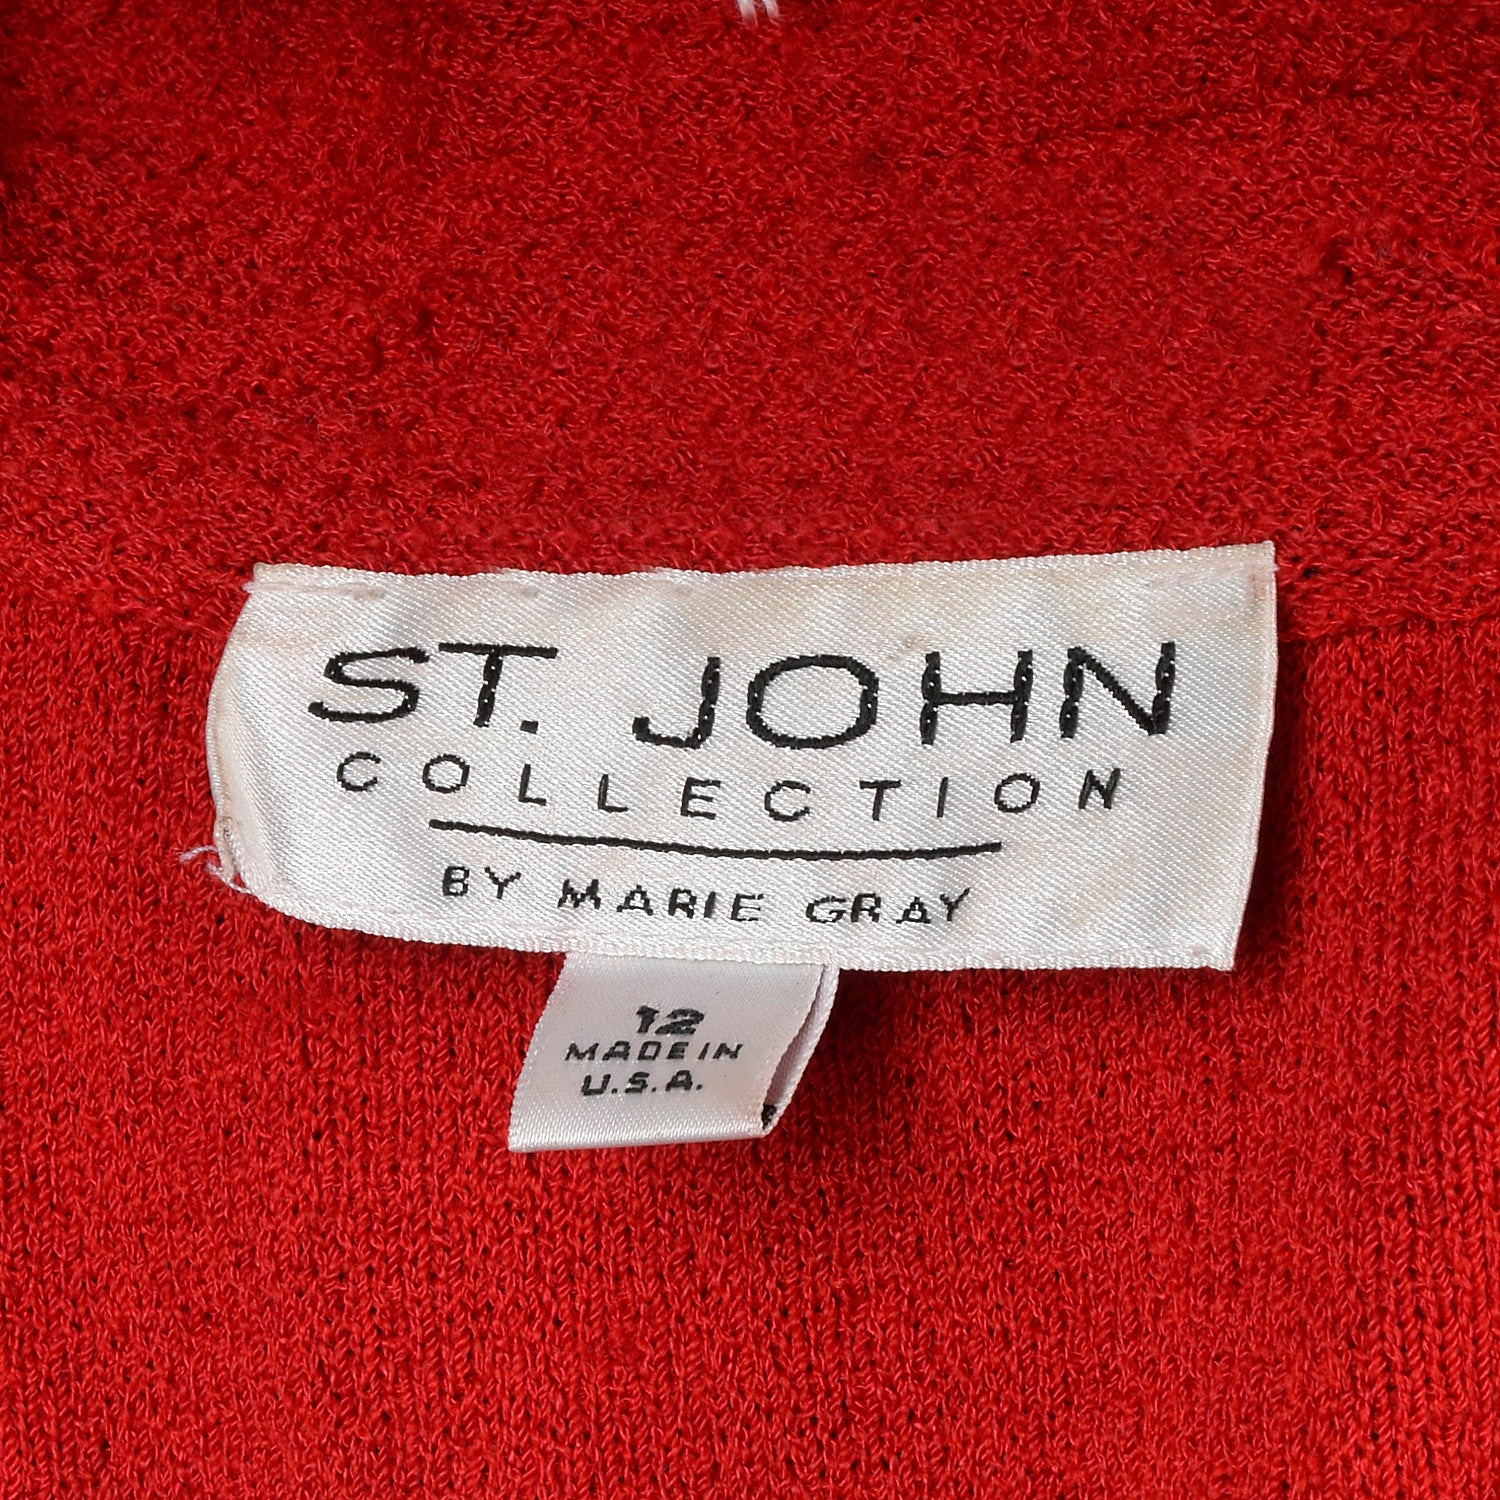 Large St. John Collection 1980s Red Knit Skirt Suit